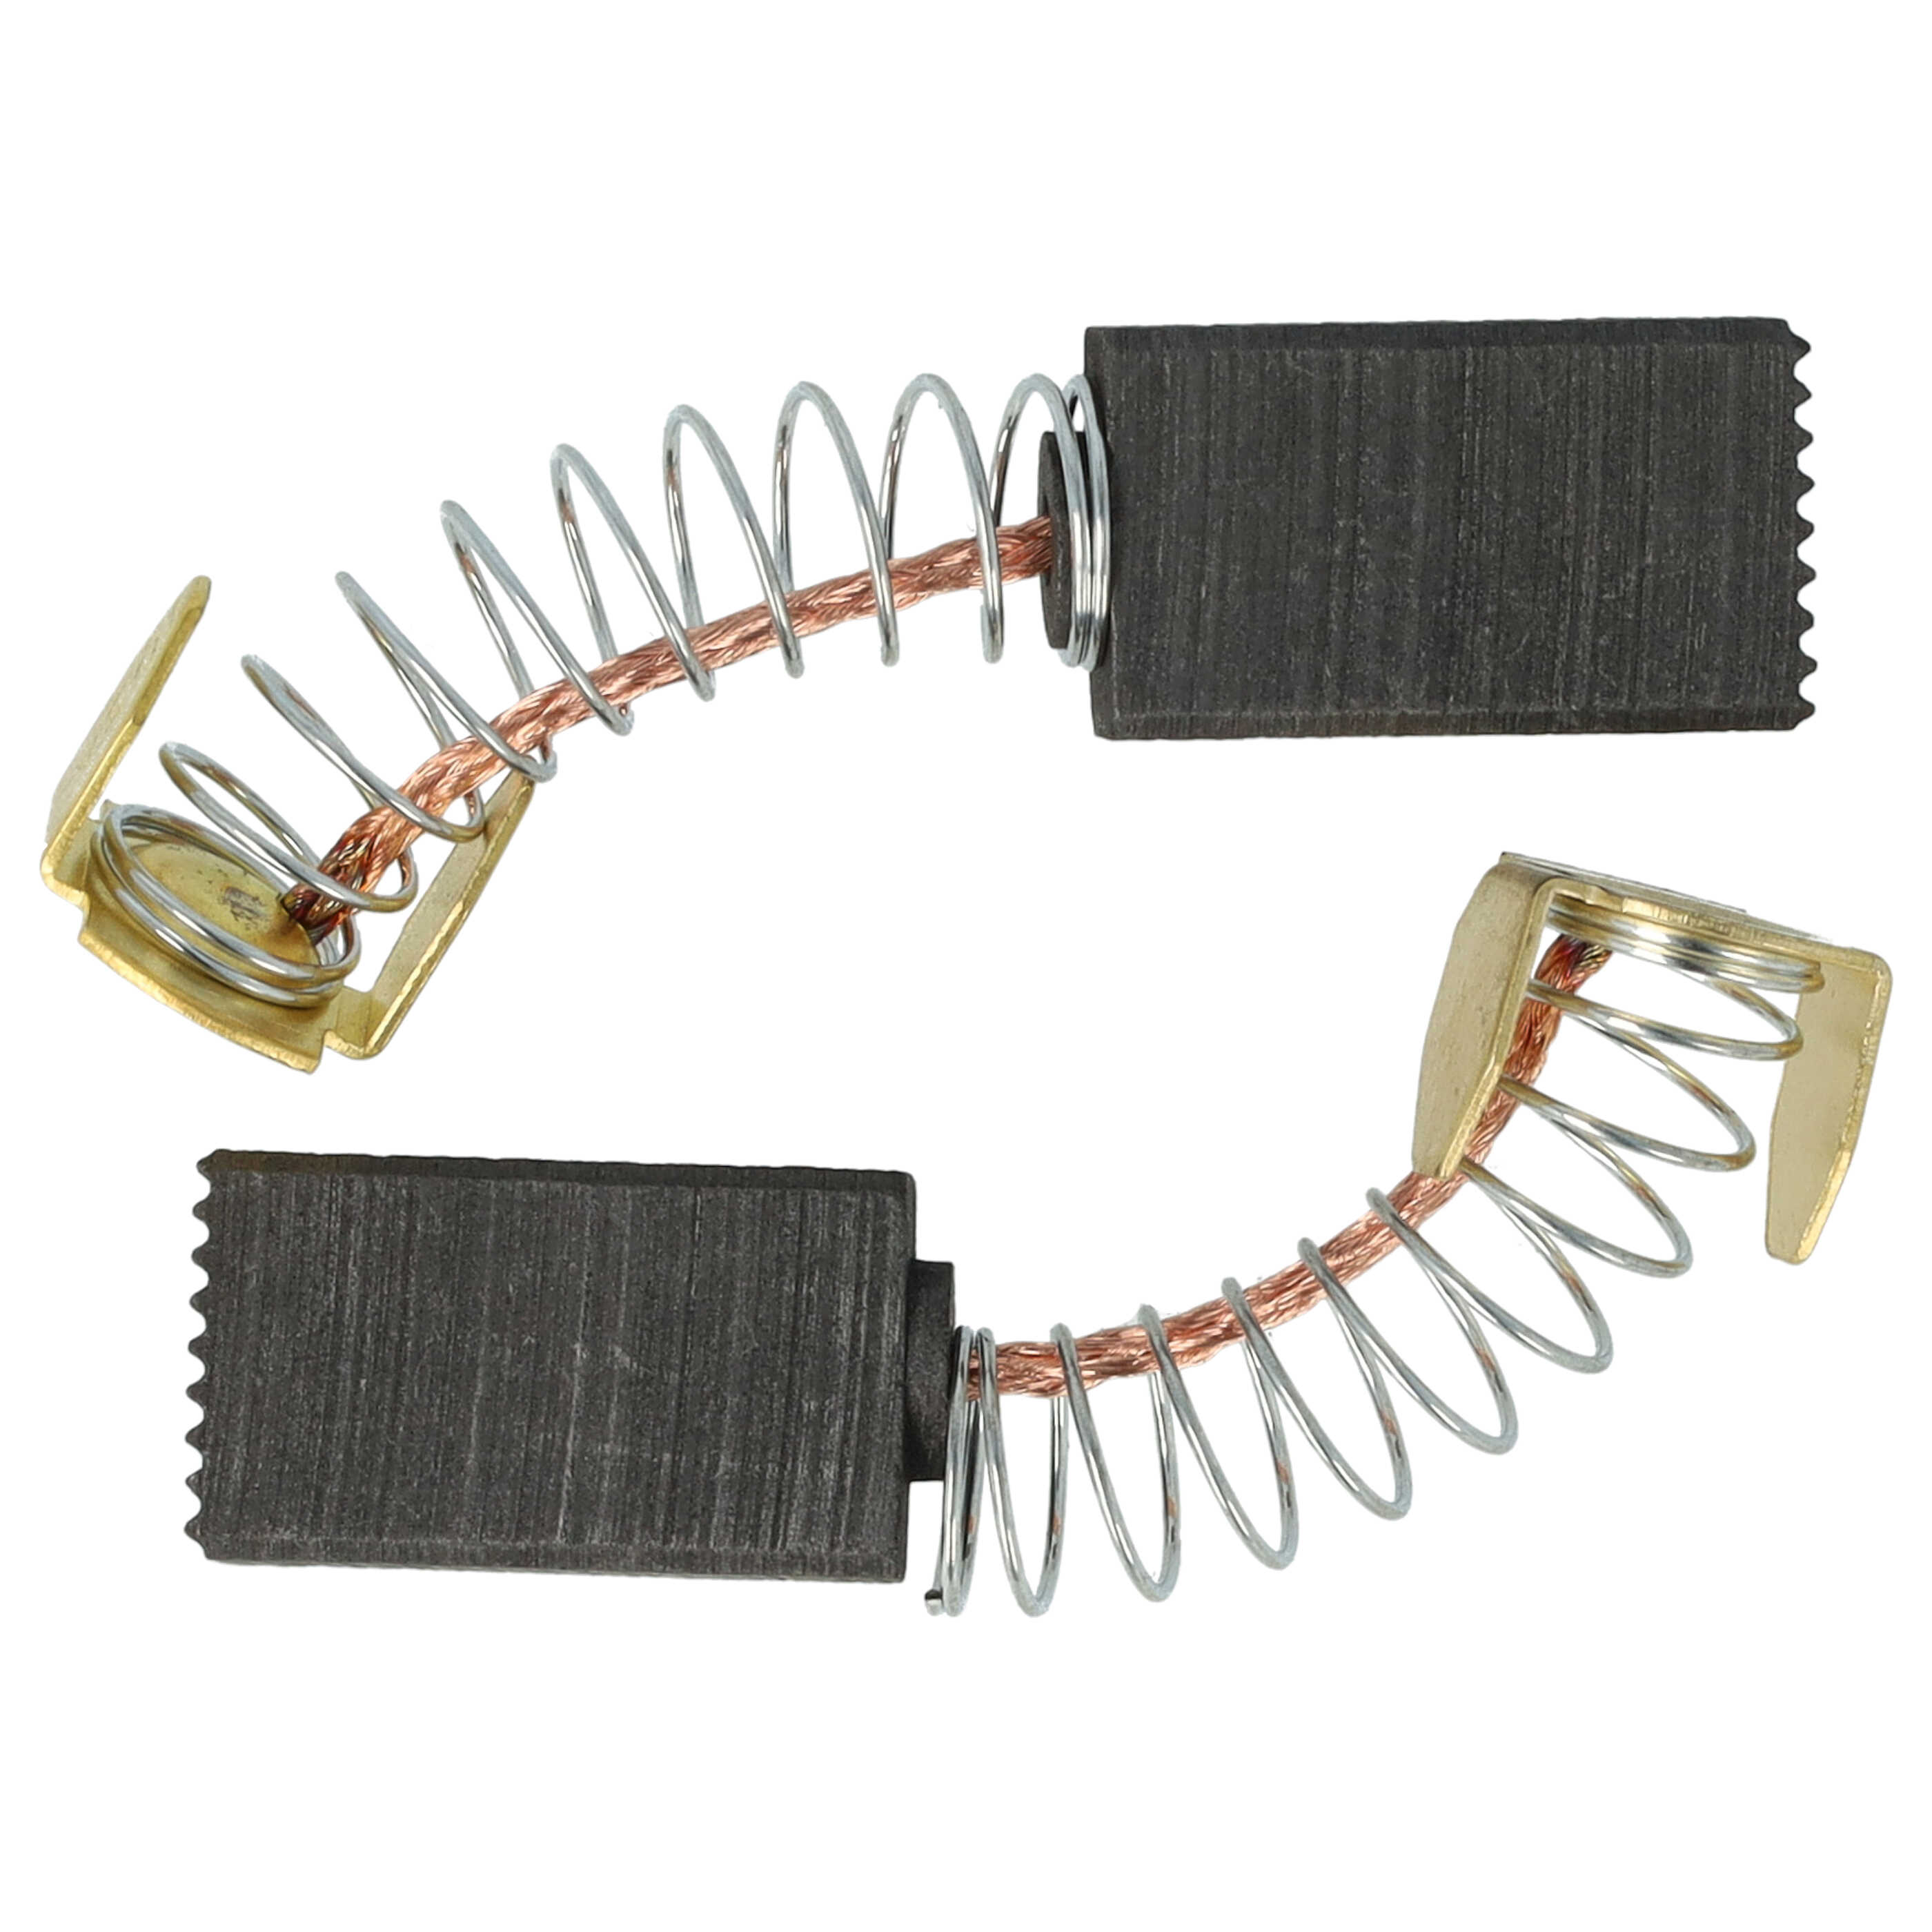 2x Carbon Brush 6 x 10 x 15 mm for power tool / miter saw / mitre saw